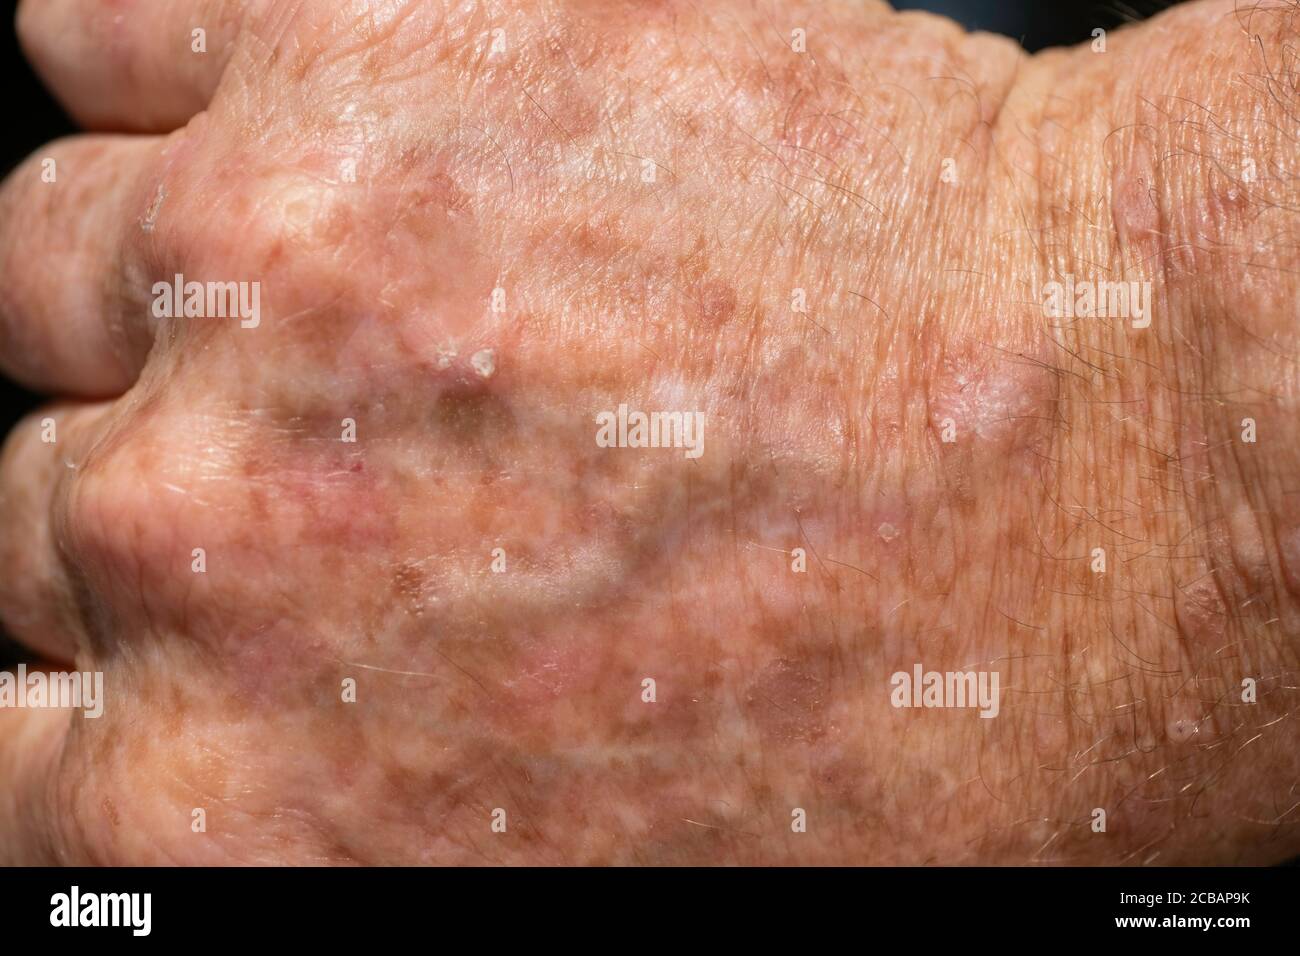 Close up of a lesion of actinic keratosis or sunspots on sun-damaged skin of the hand of a man. This can be treated with cryosurgery or ointments Stock Photo